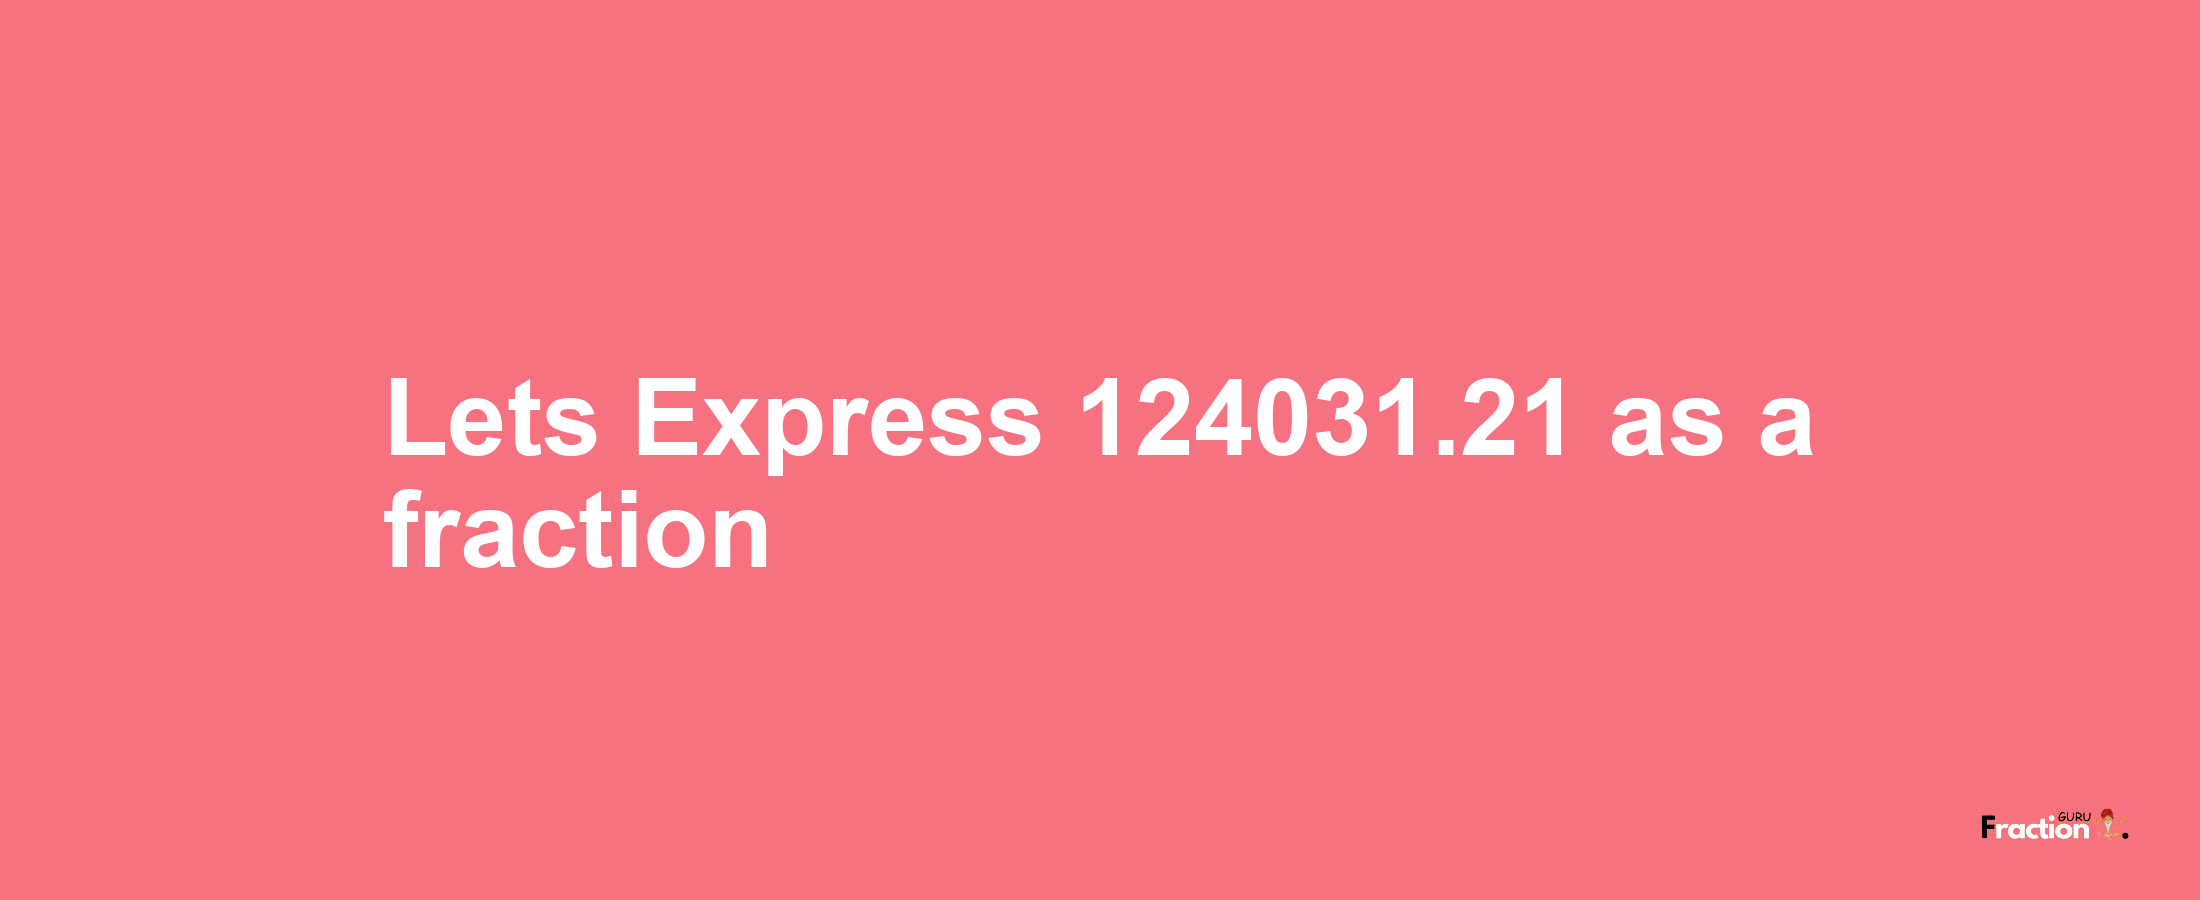 Lets Express 124031.21 as afraction